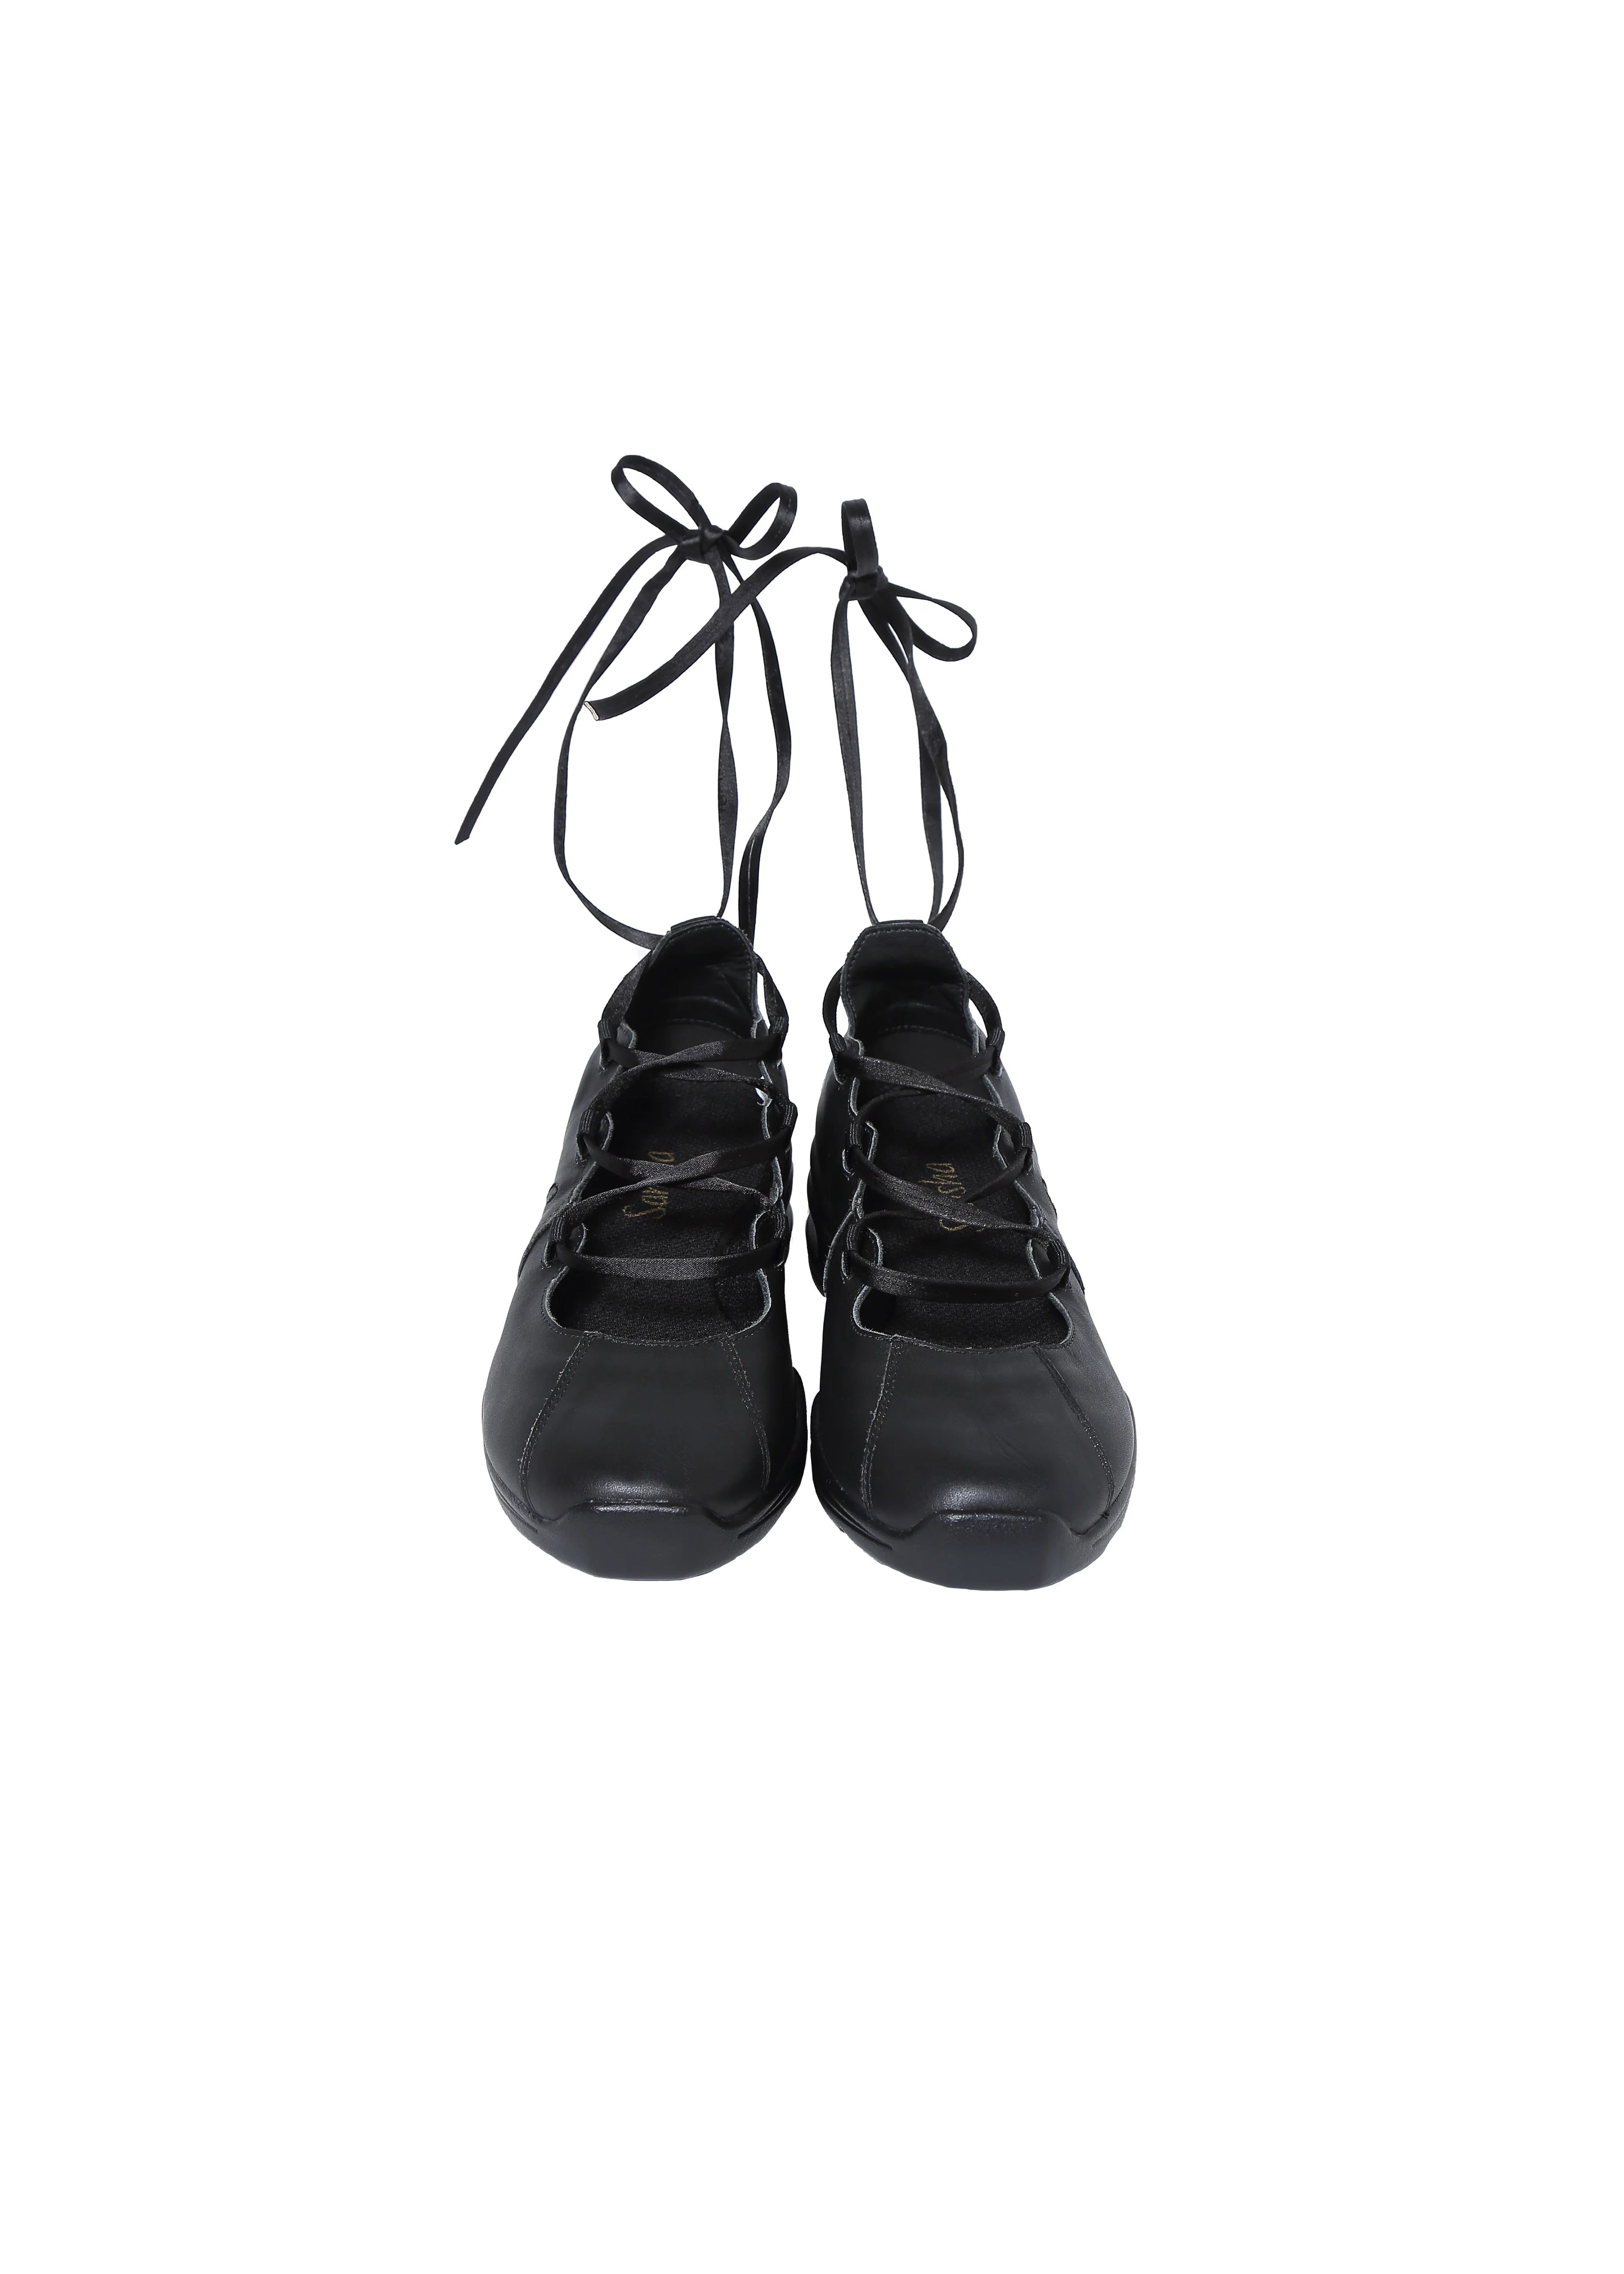 【Pre-order】Posie Lace Up Shoes